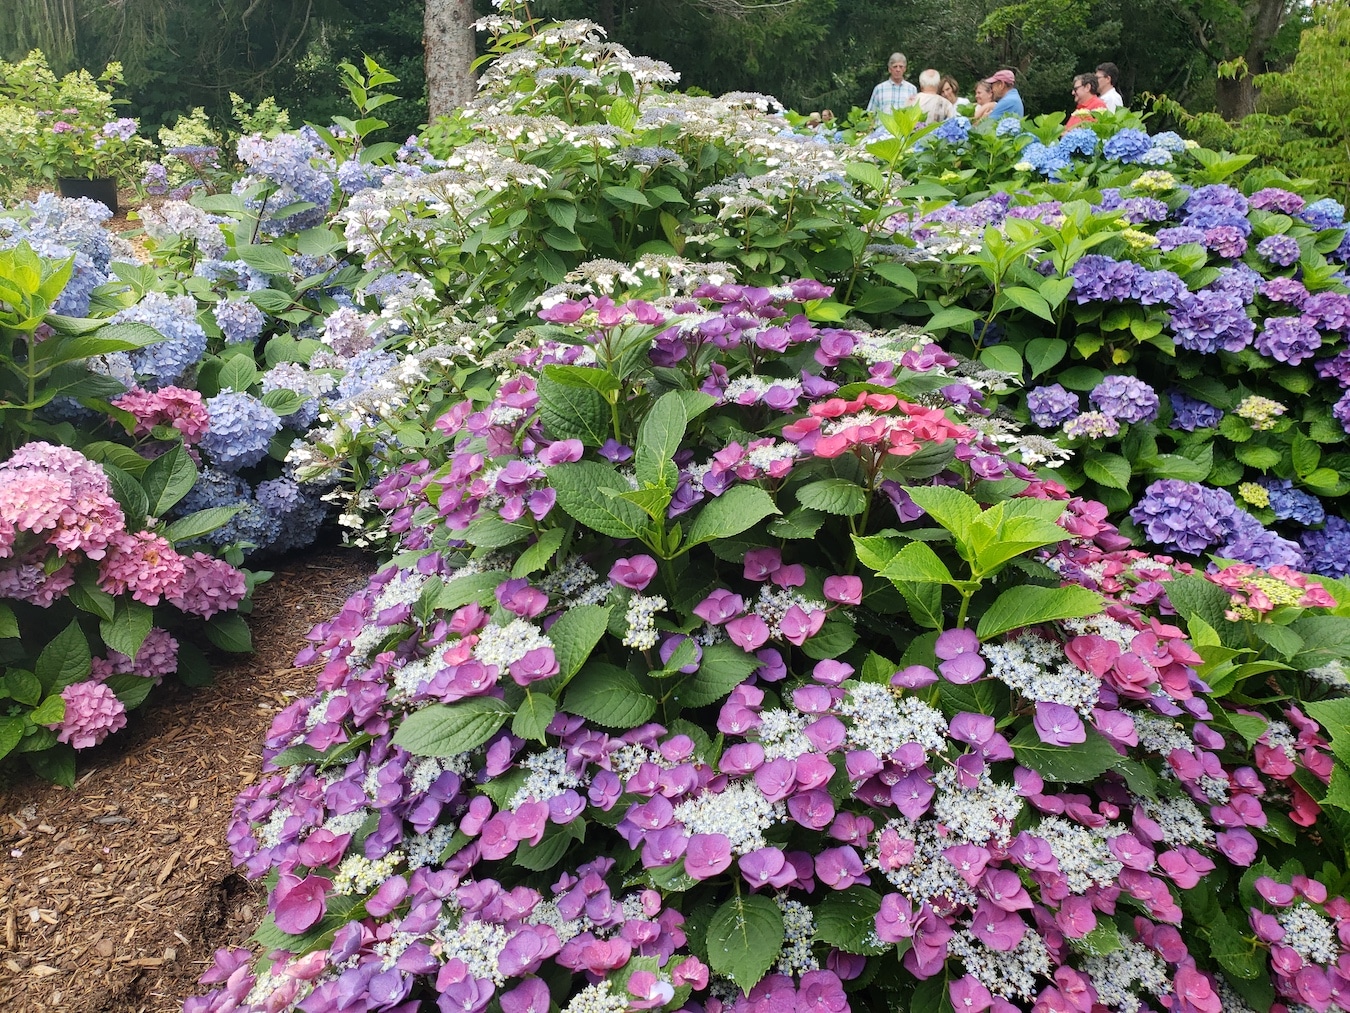 Discover Blooming Wonders at the Cape Cod Hydrangea Festival New England